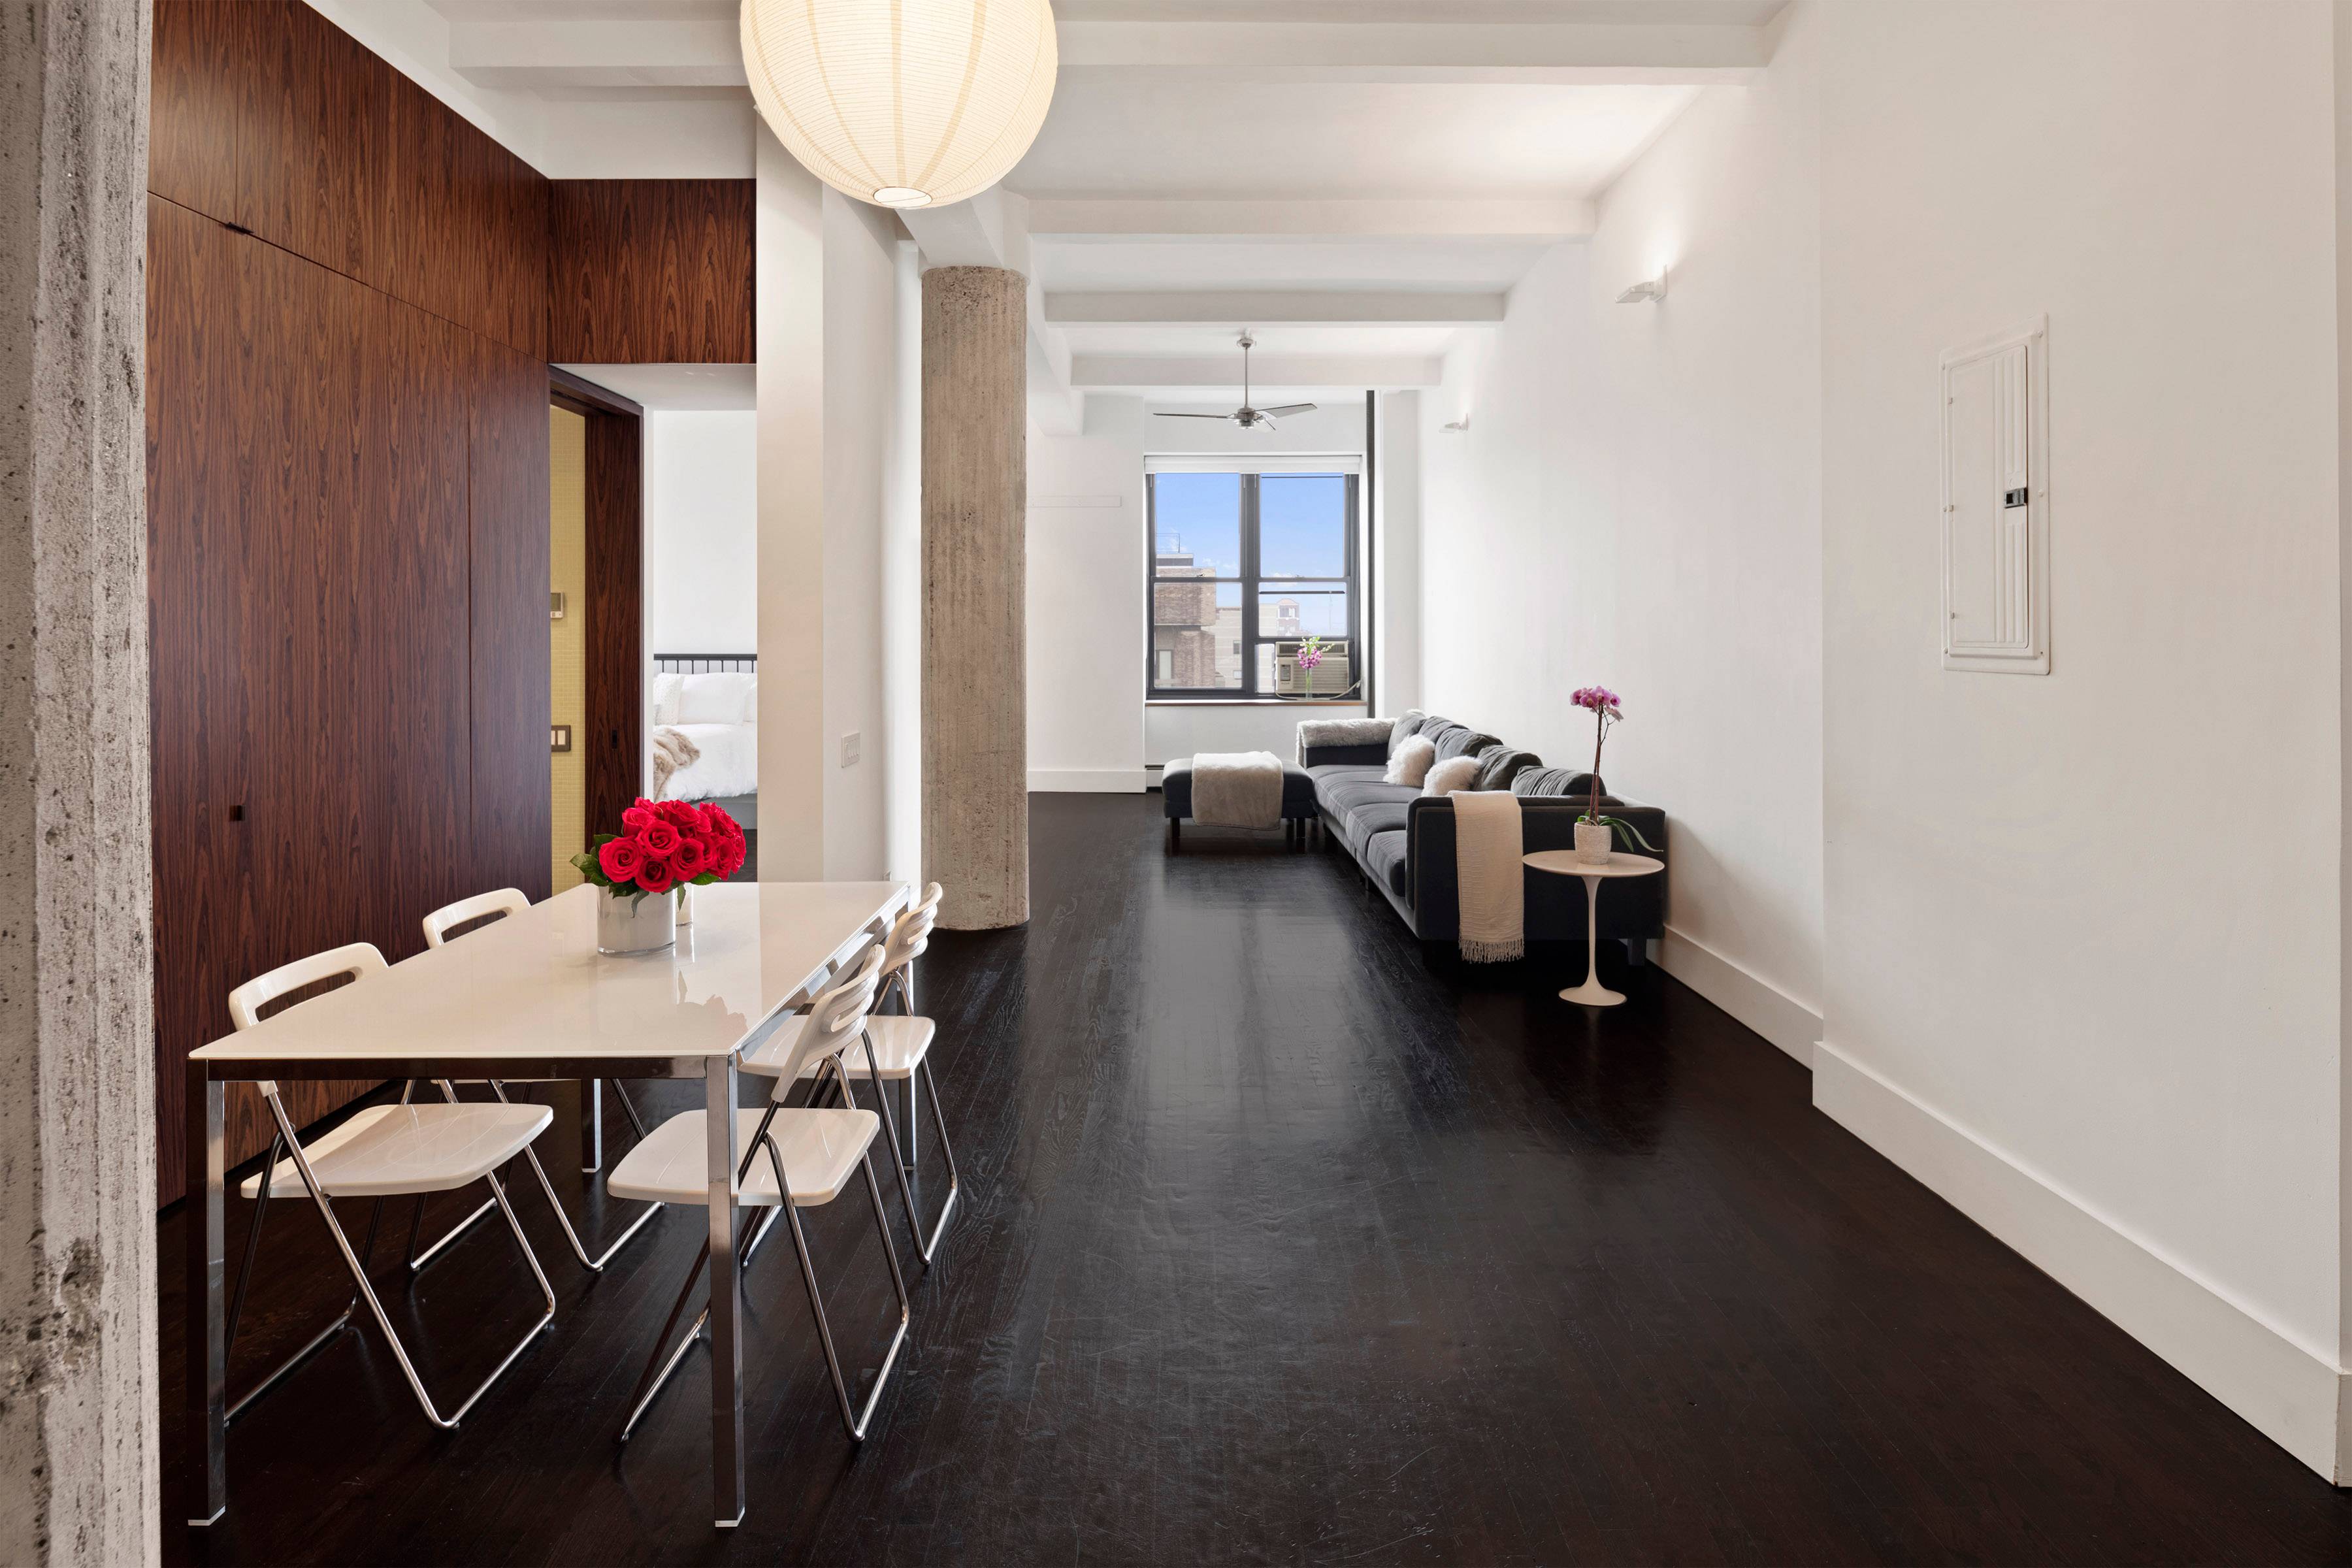 Chic & Stunning Triple Mint High Floor Large Modern One Bedroom Loft  Plus Interior Bedroom & Home Office with 12 ft Ceilings & Sky Views  in an Iconic Doorman Building in Greenwich Village/Noho